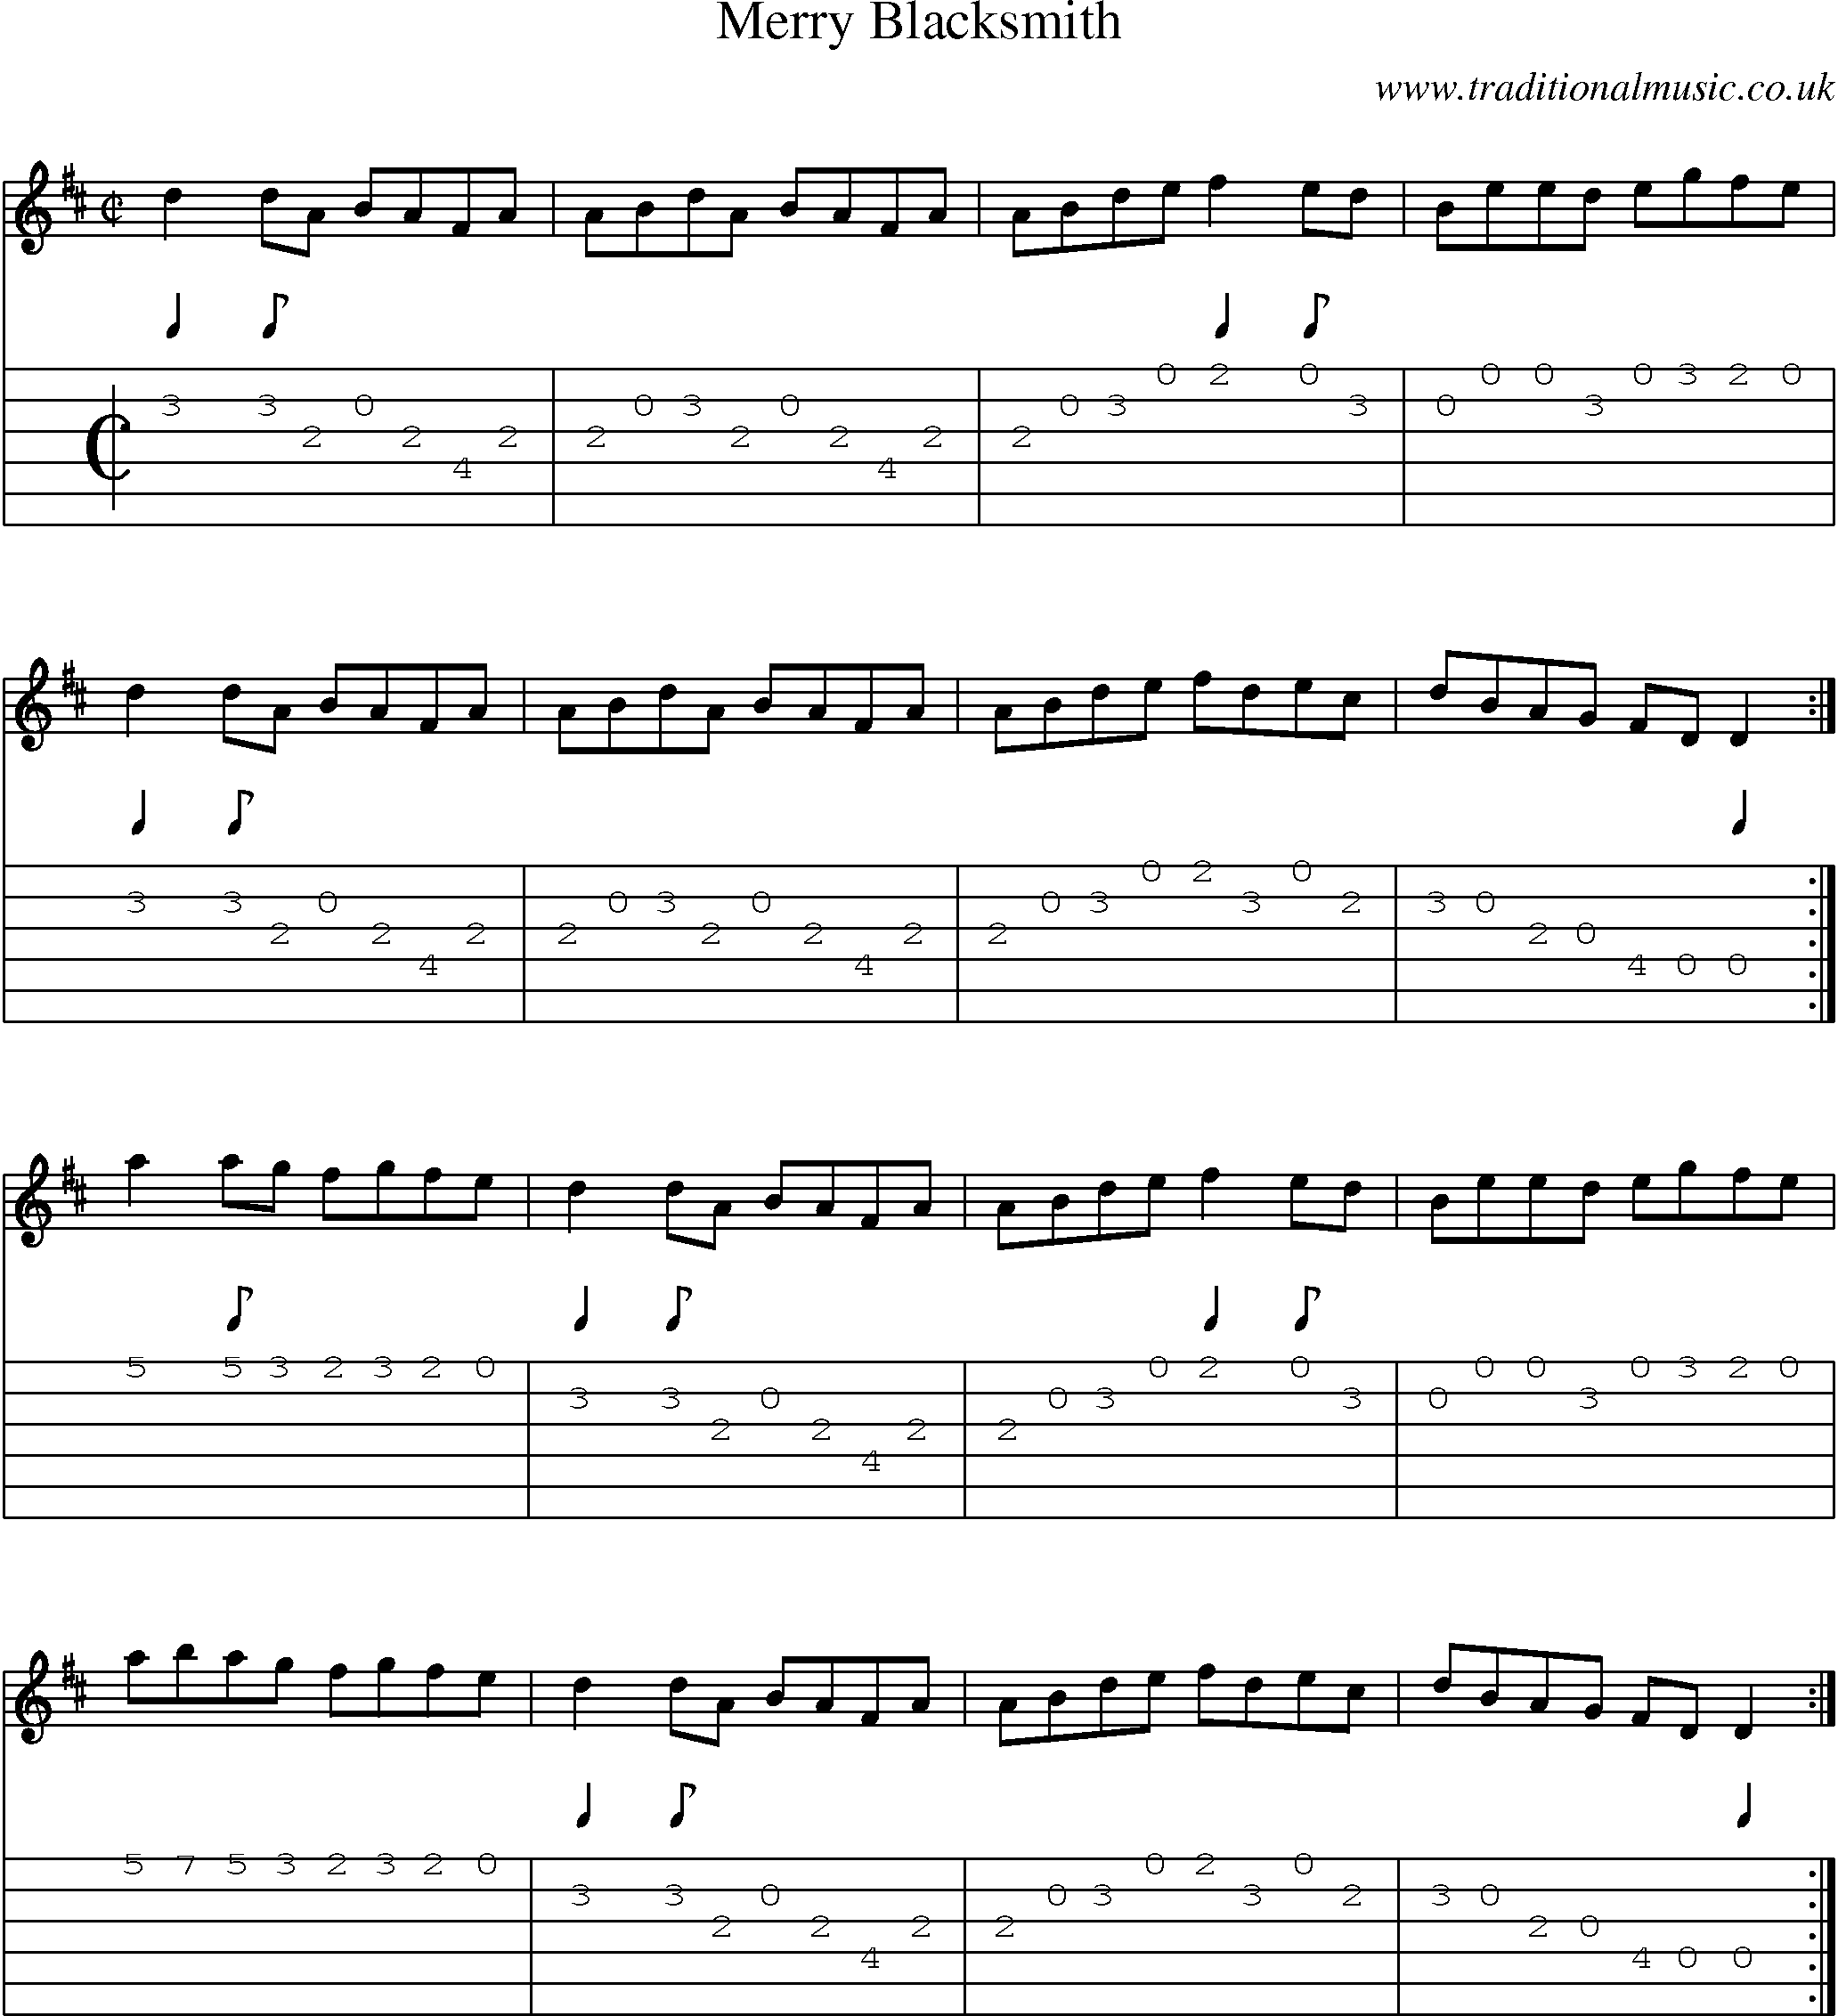 Music Score and Guitar Tabs for Merry Blacksmith